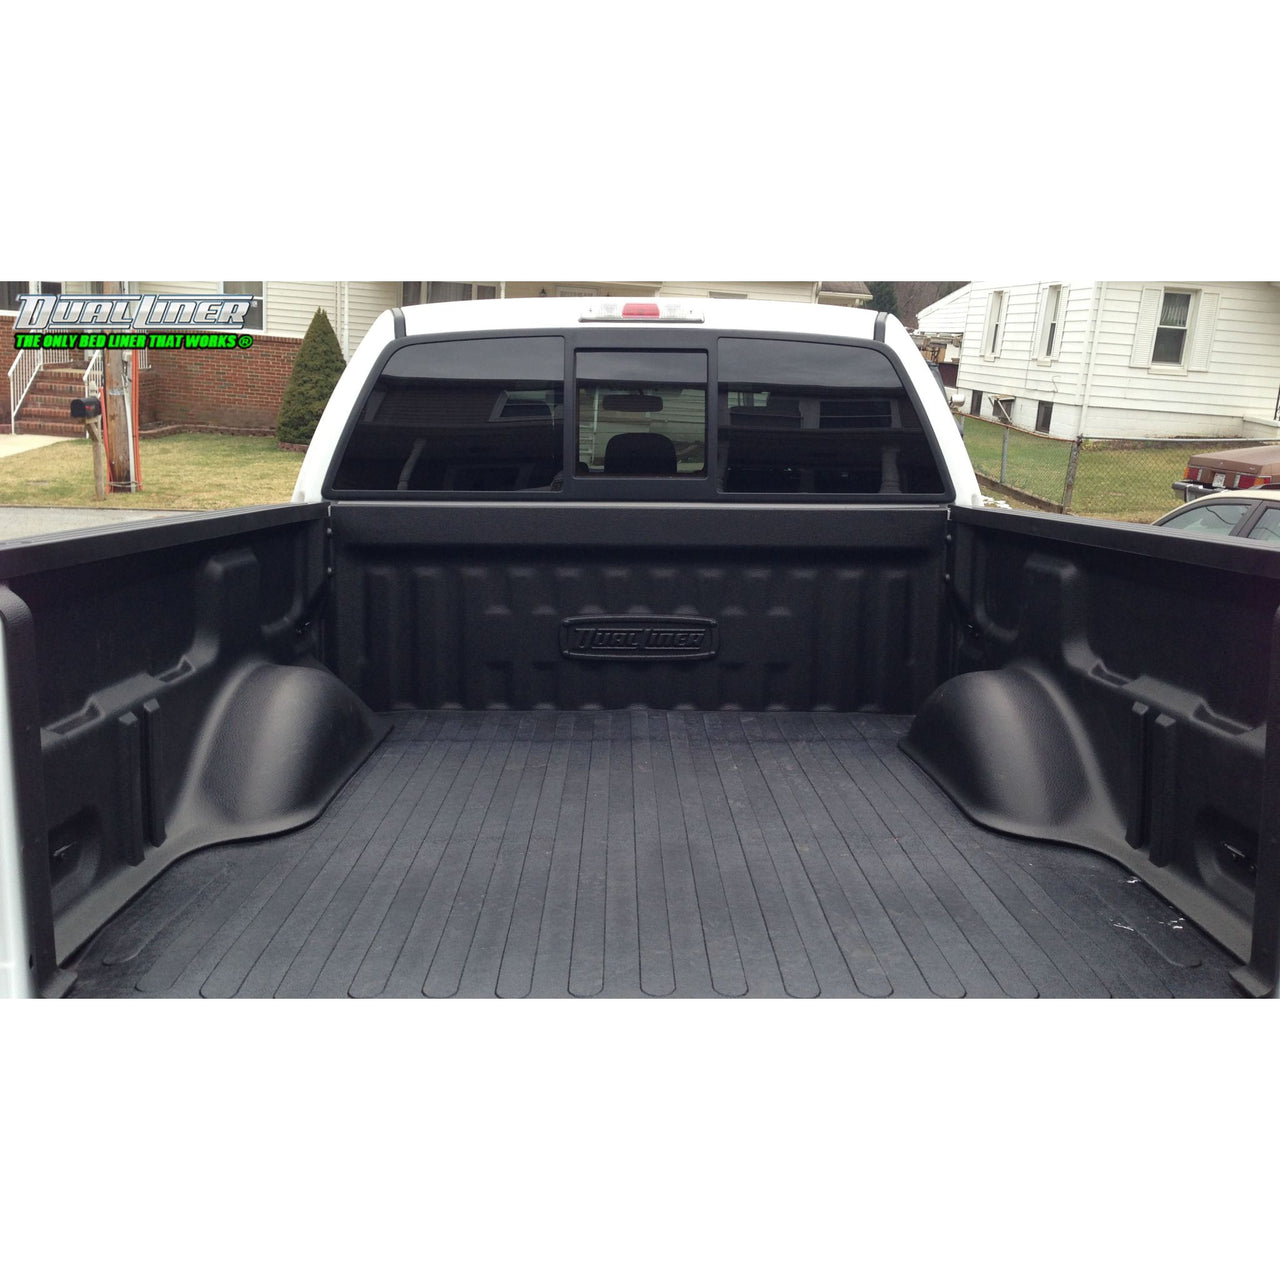 DualLiner 2018 to 2020 F-150 (WITH LED Light Bar) - Regular 6.5' Bed